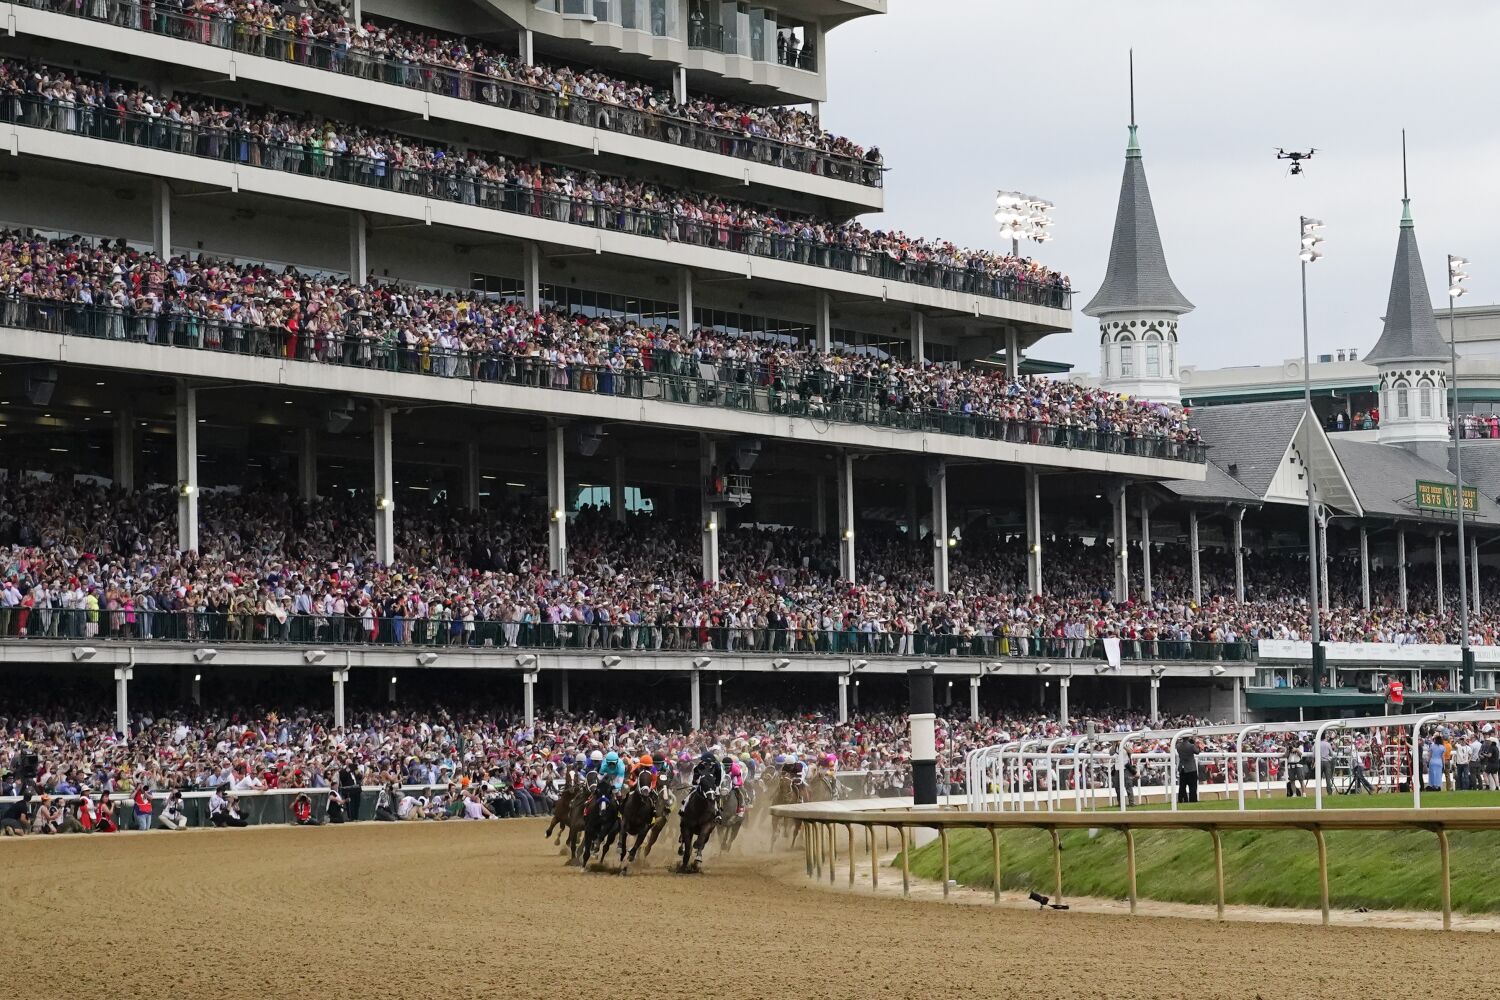 Horse death toll at Churchill Downs grows to 11 in the last month